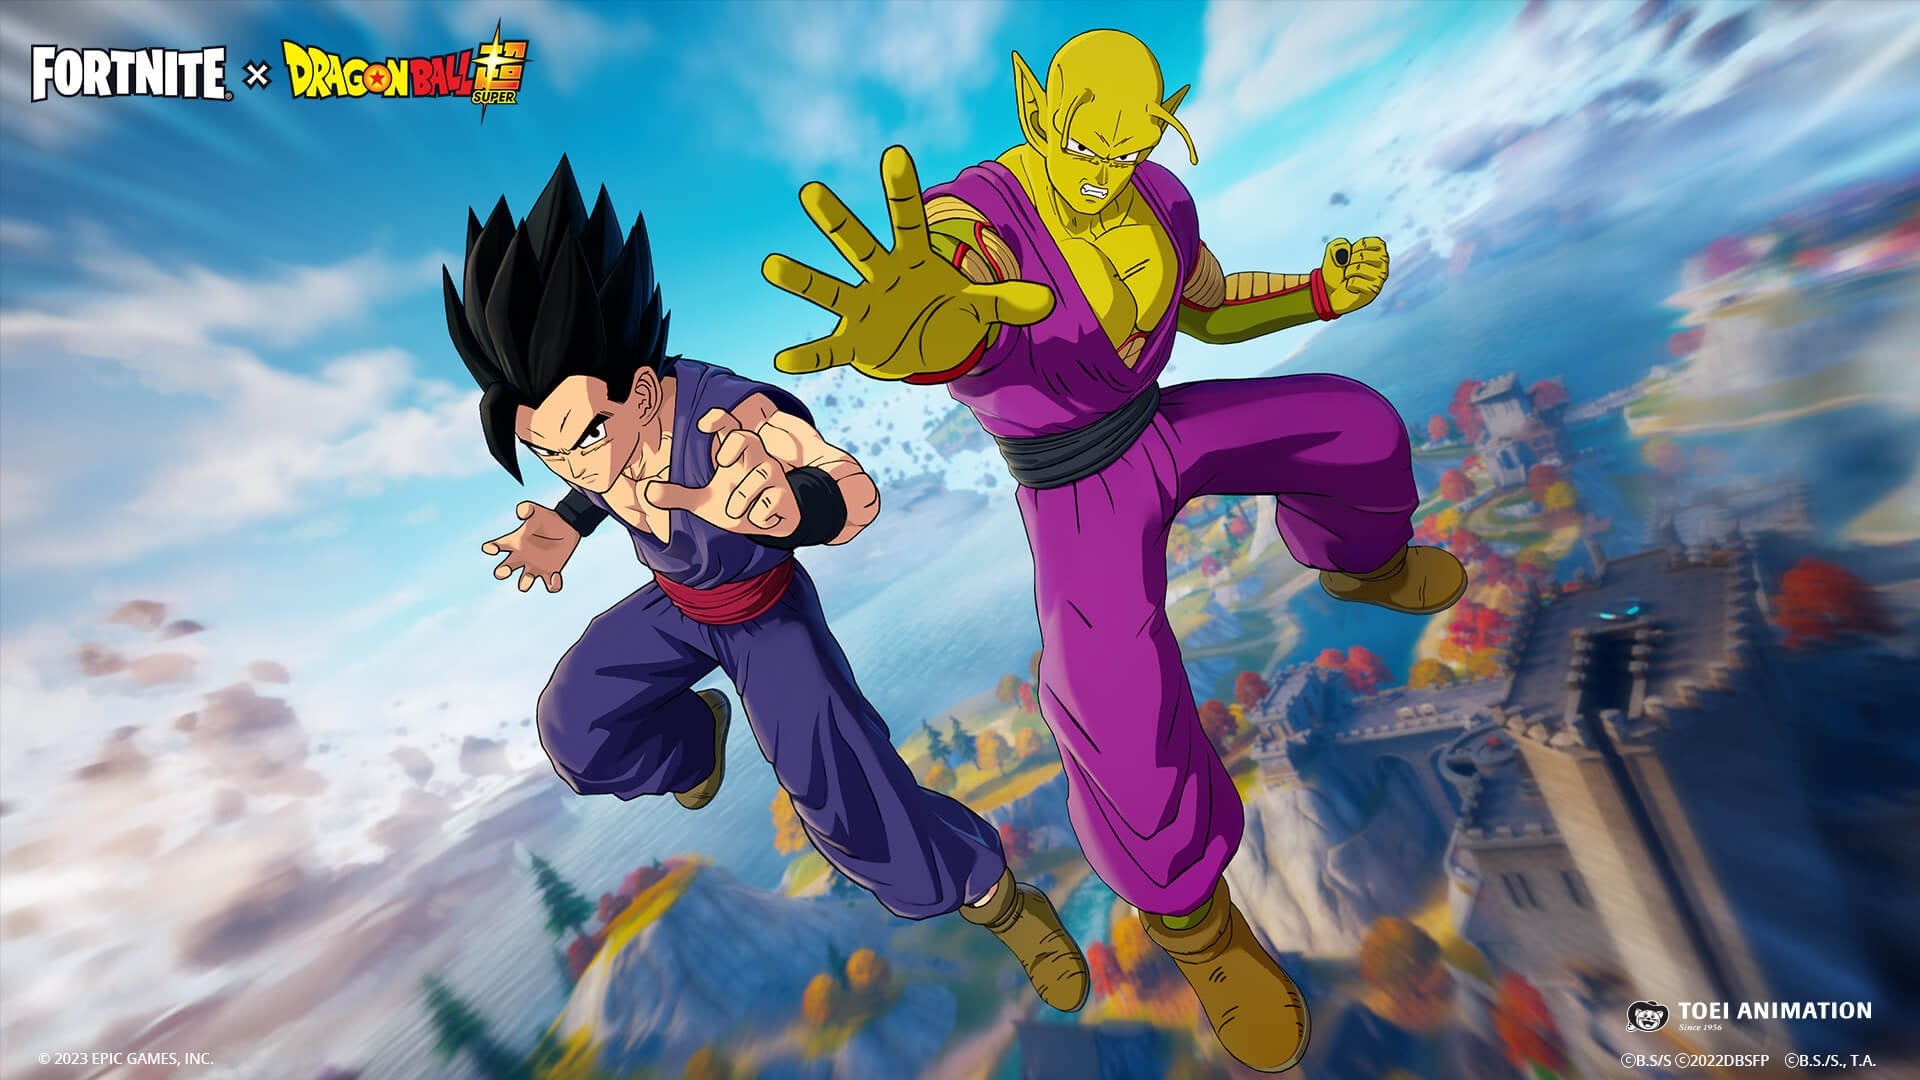 Gohan and Piccolo in Fortnite x DragonBall event